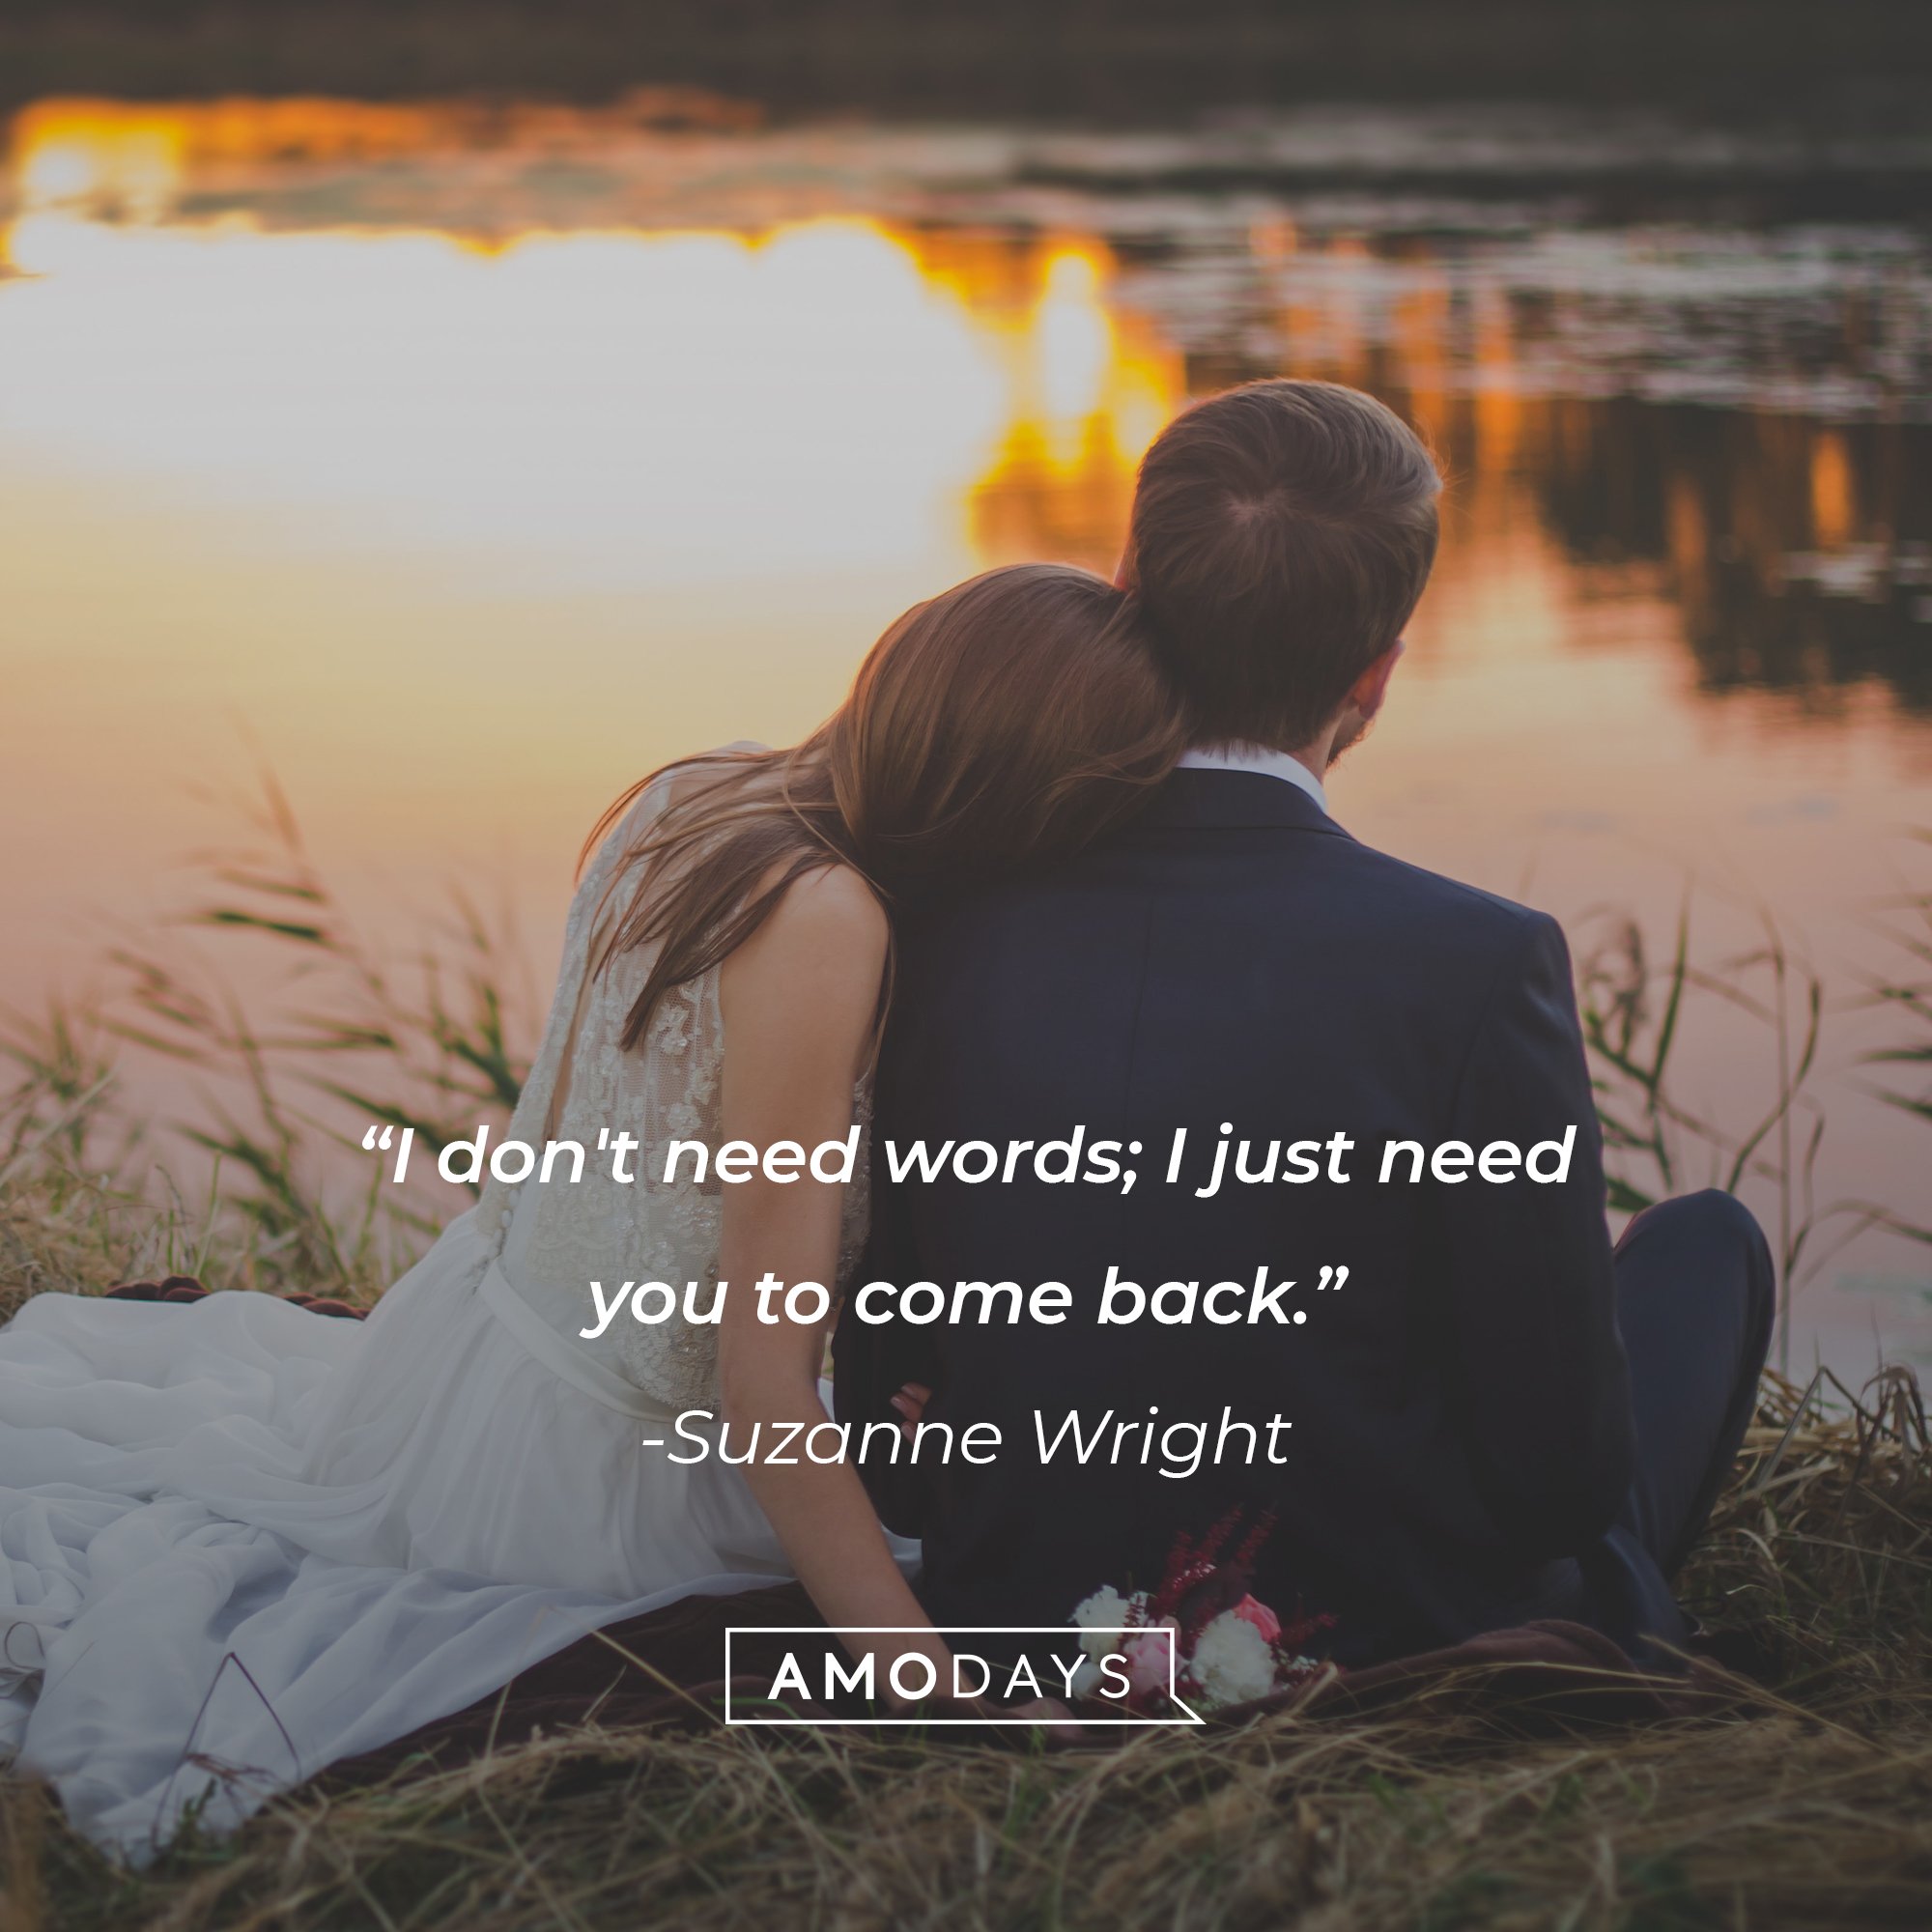 Suzanne Wright’s quote: "I don't need words; I just need you to come back." | Image: AmoDays